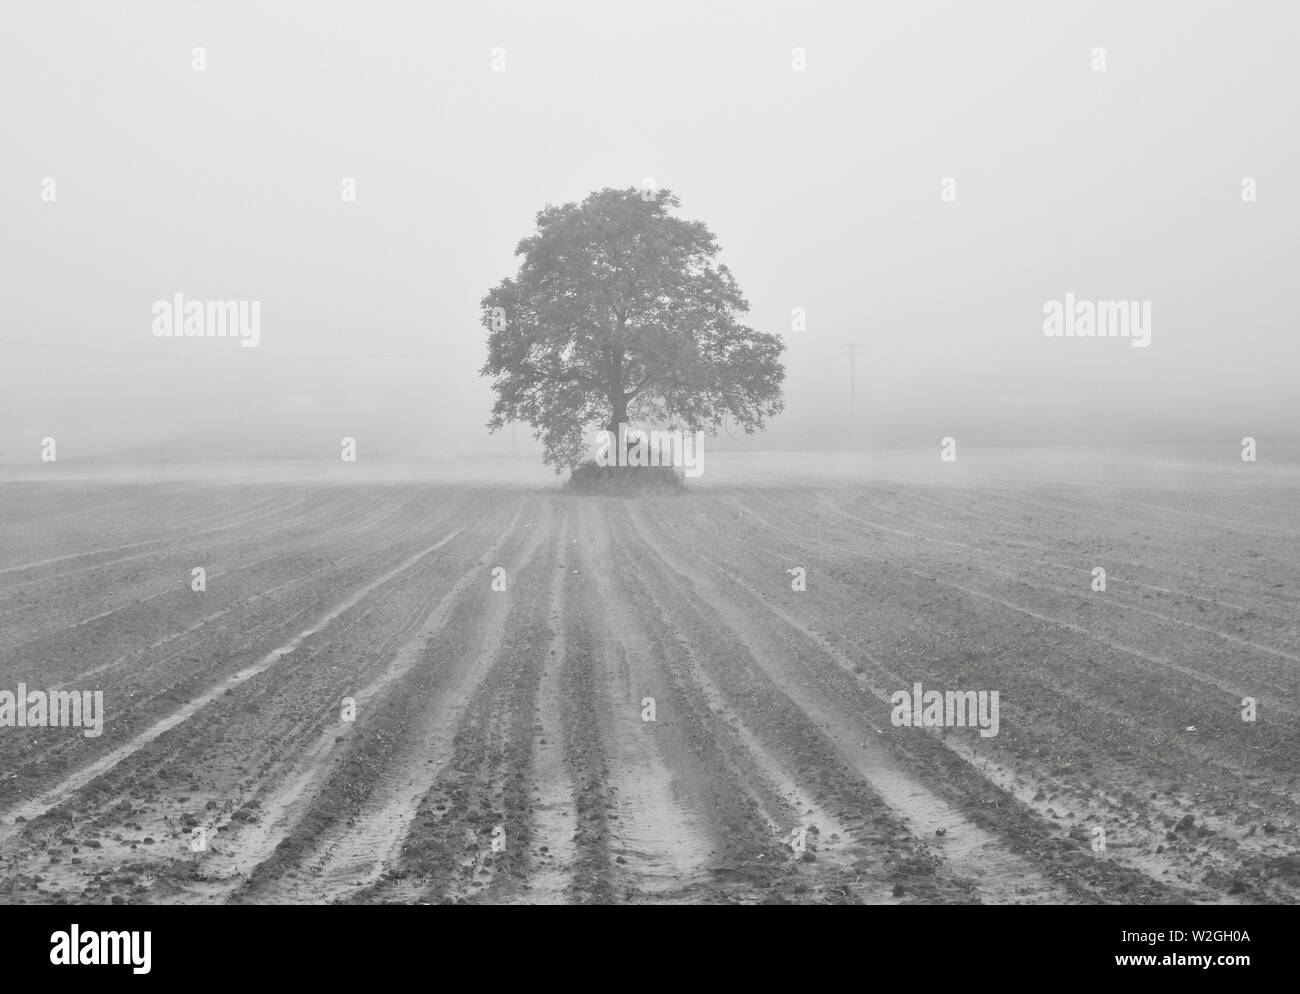 Lonely tree in ploughed field, misty landscape Stock Photo